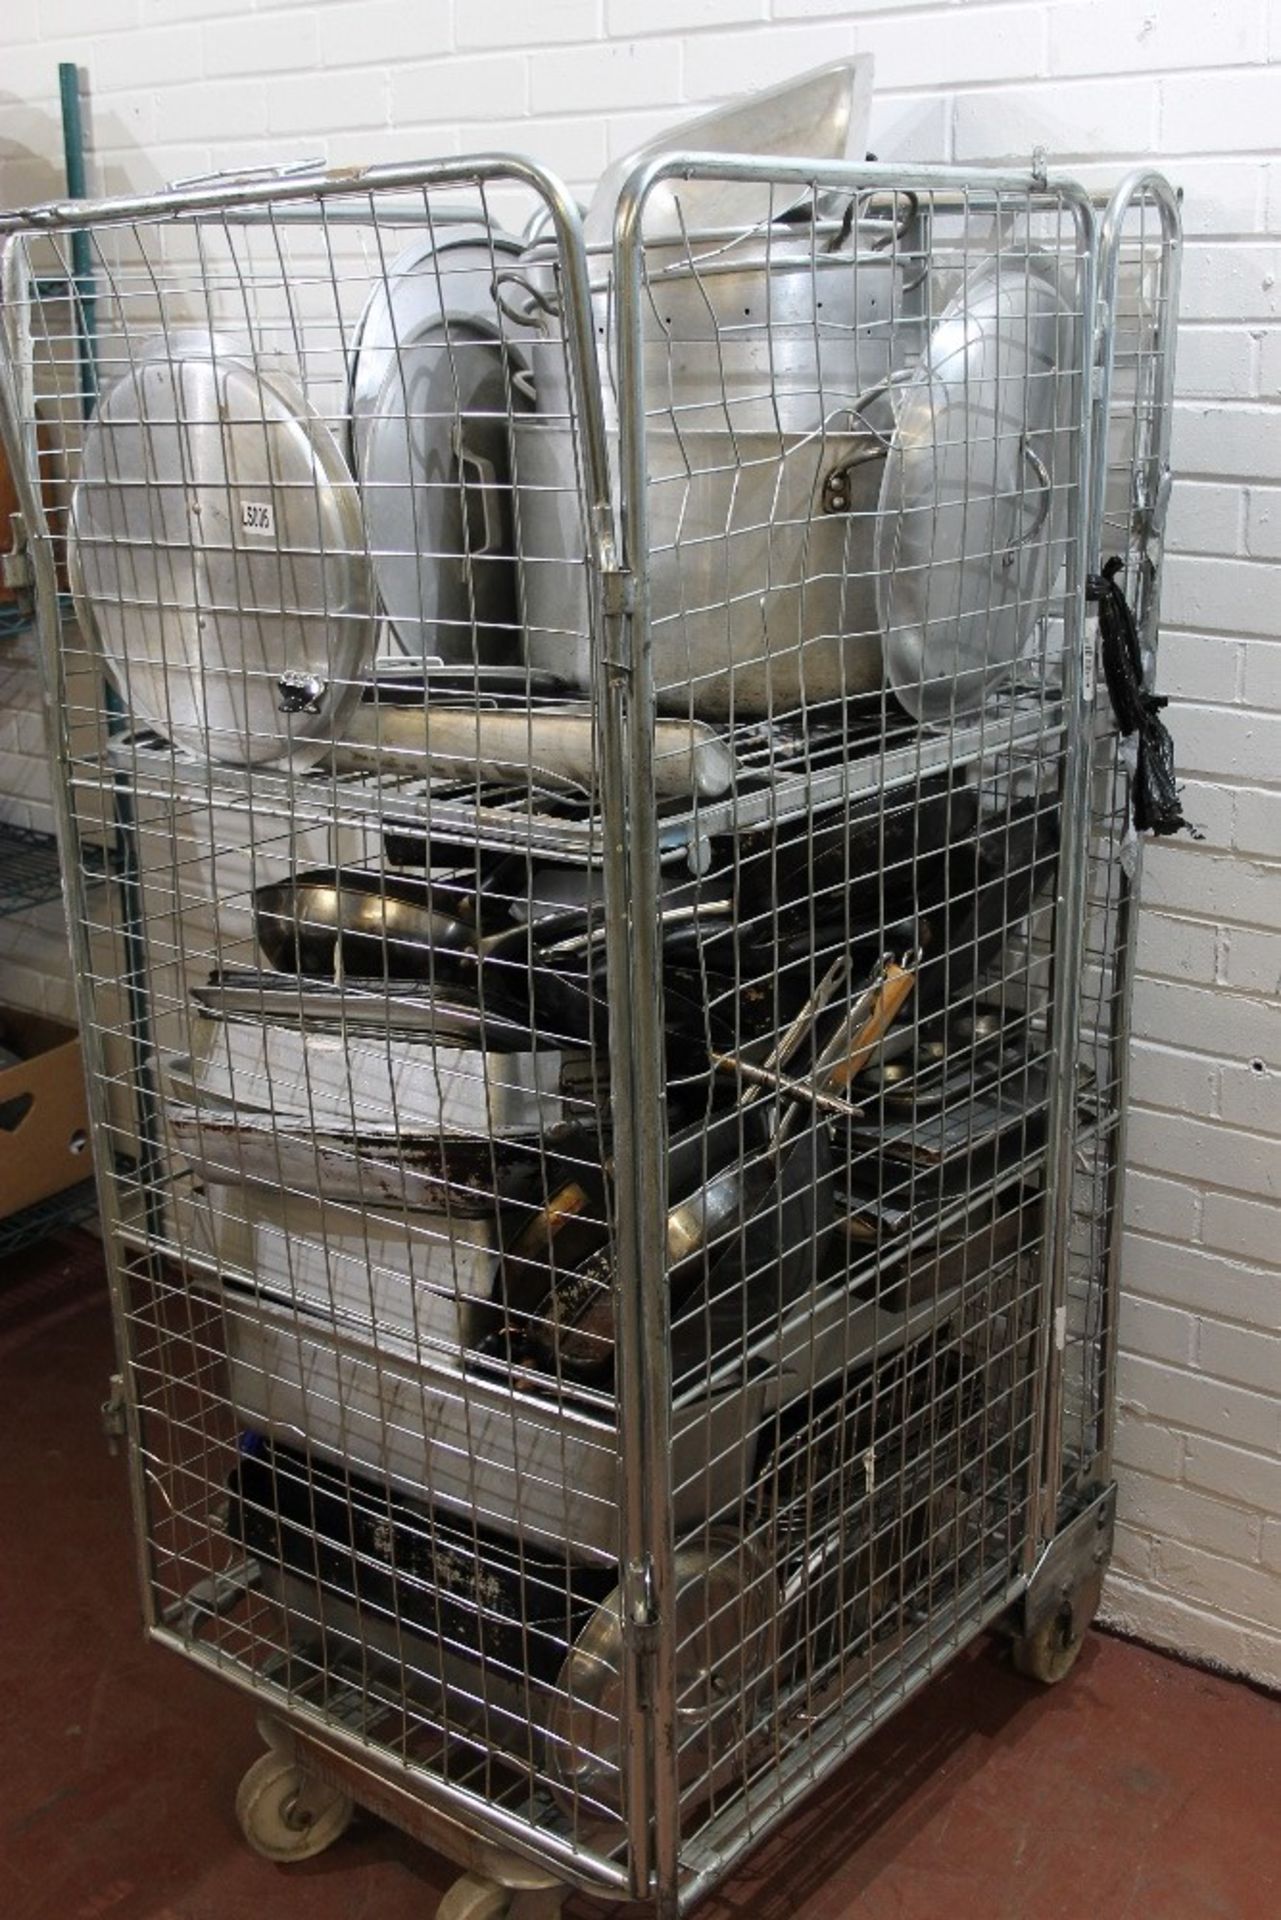 Full Cage of Professional catering Pots, Pans, Meat Trays , Platters etc – everything for a busy